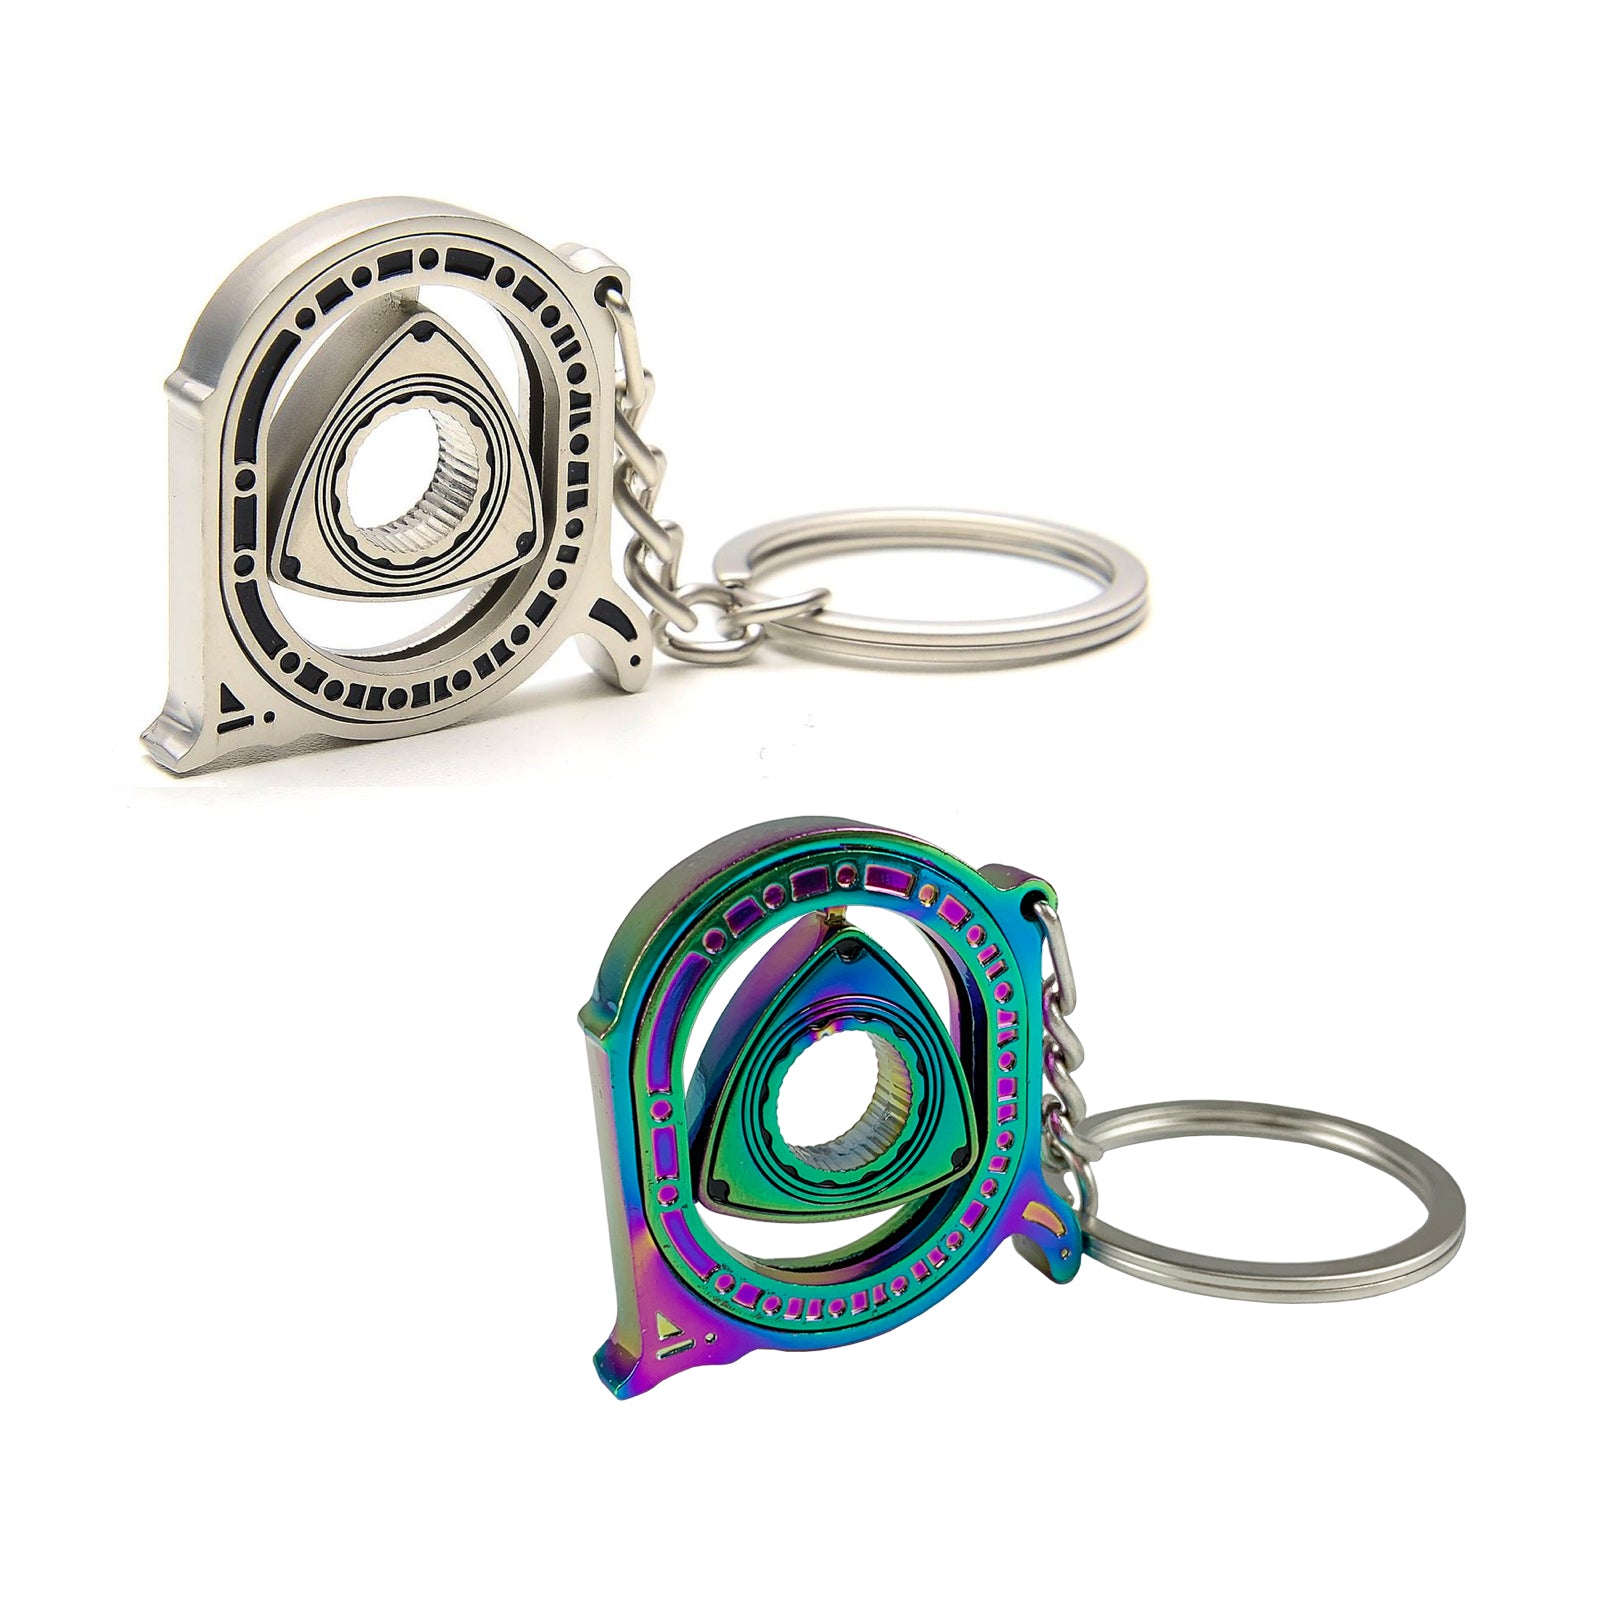 Spinning Rotary Engine Keychain in silver and neochrome.